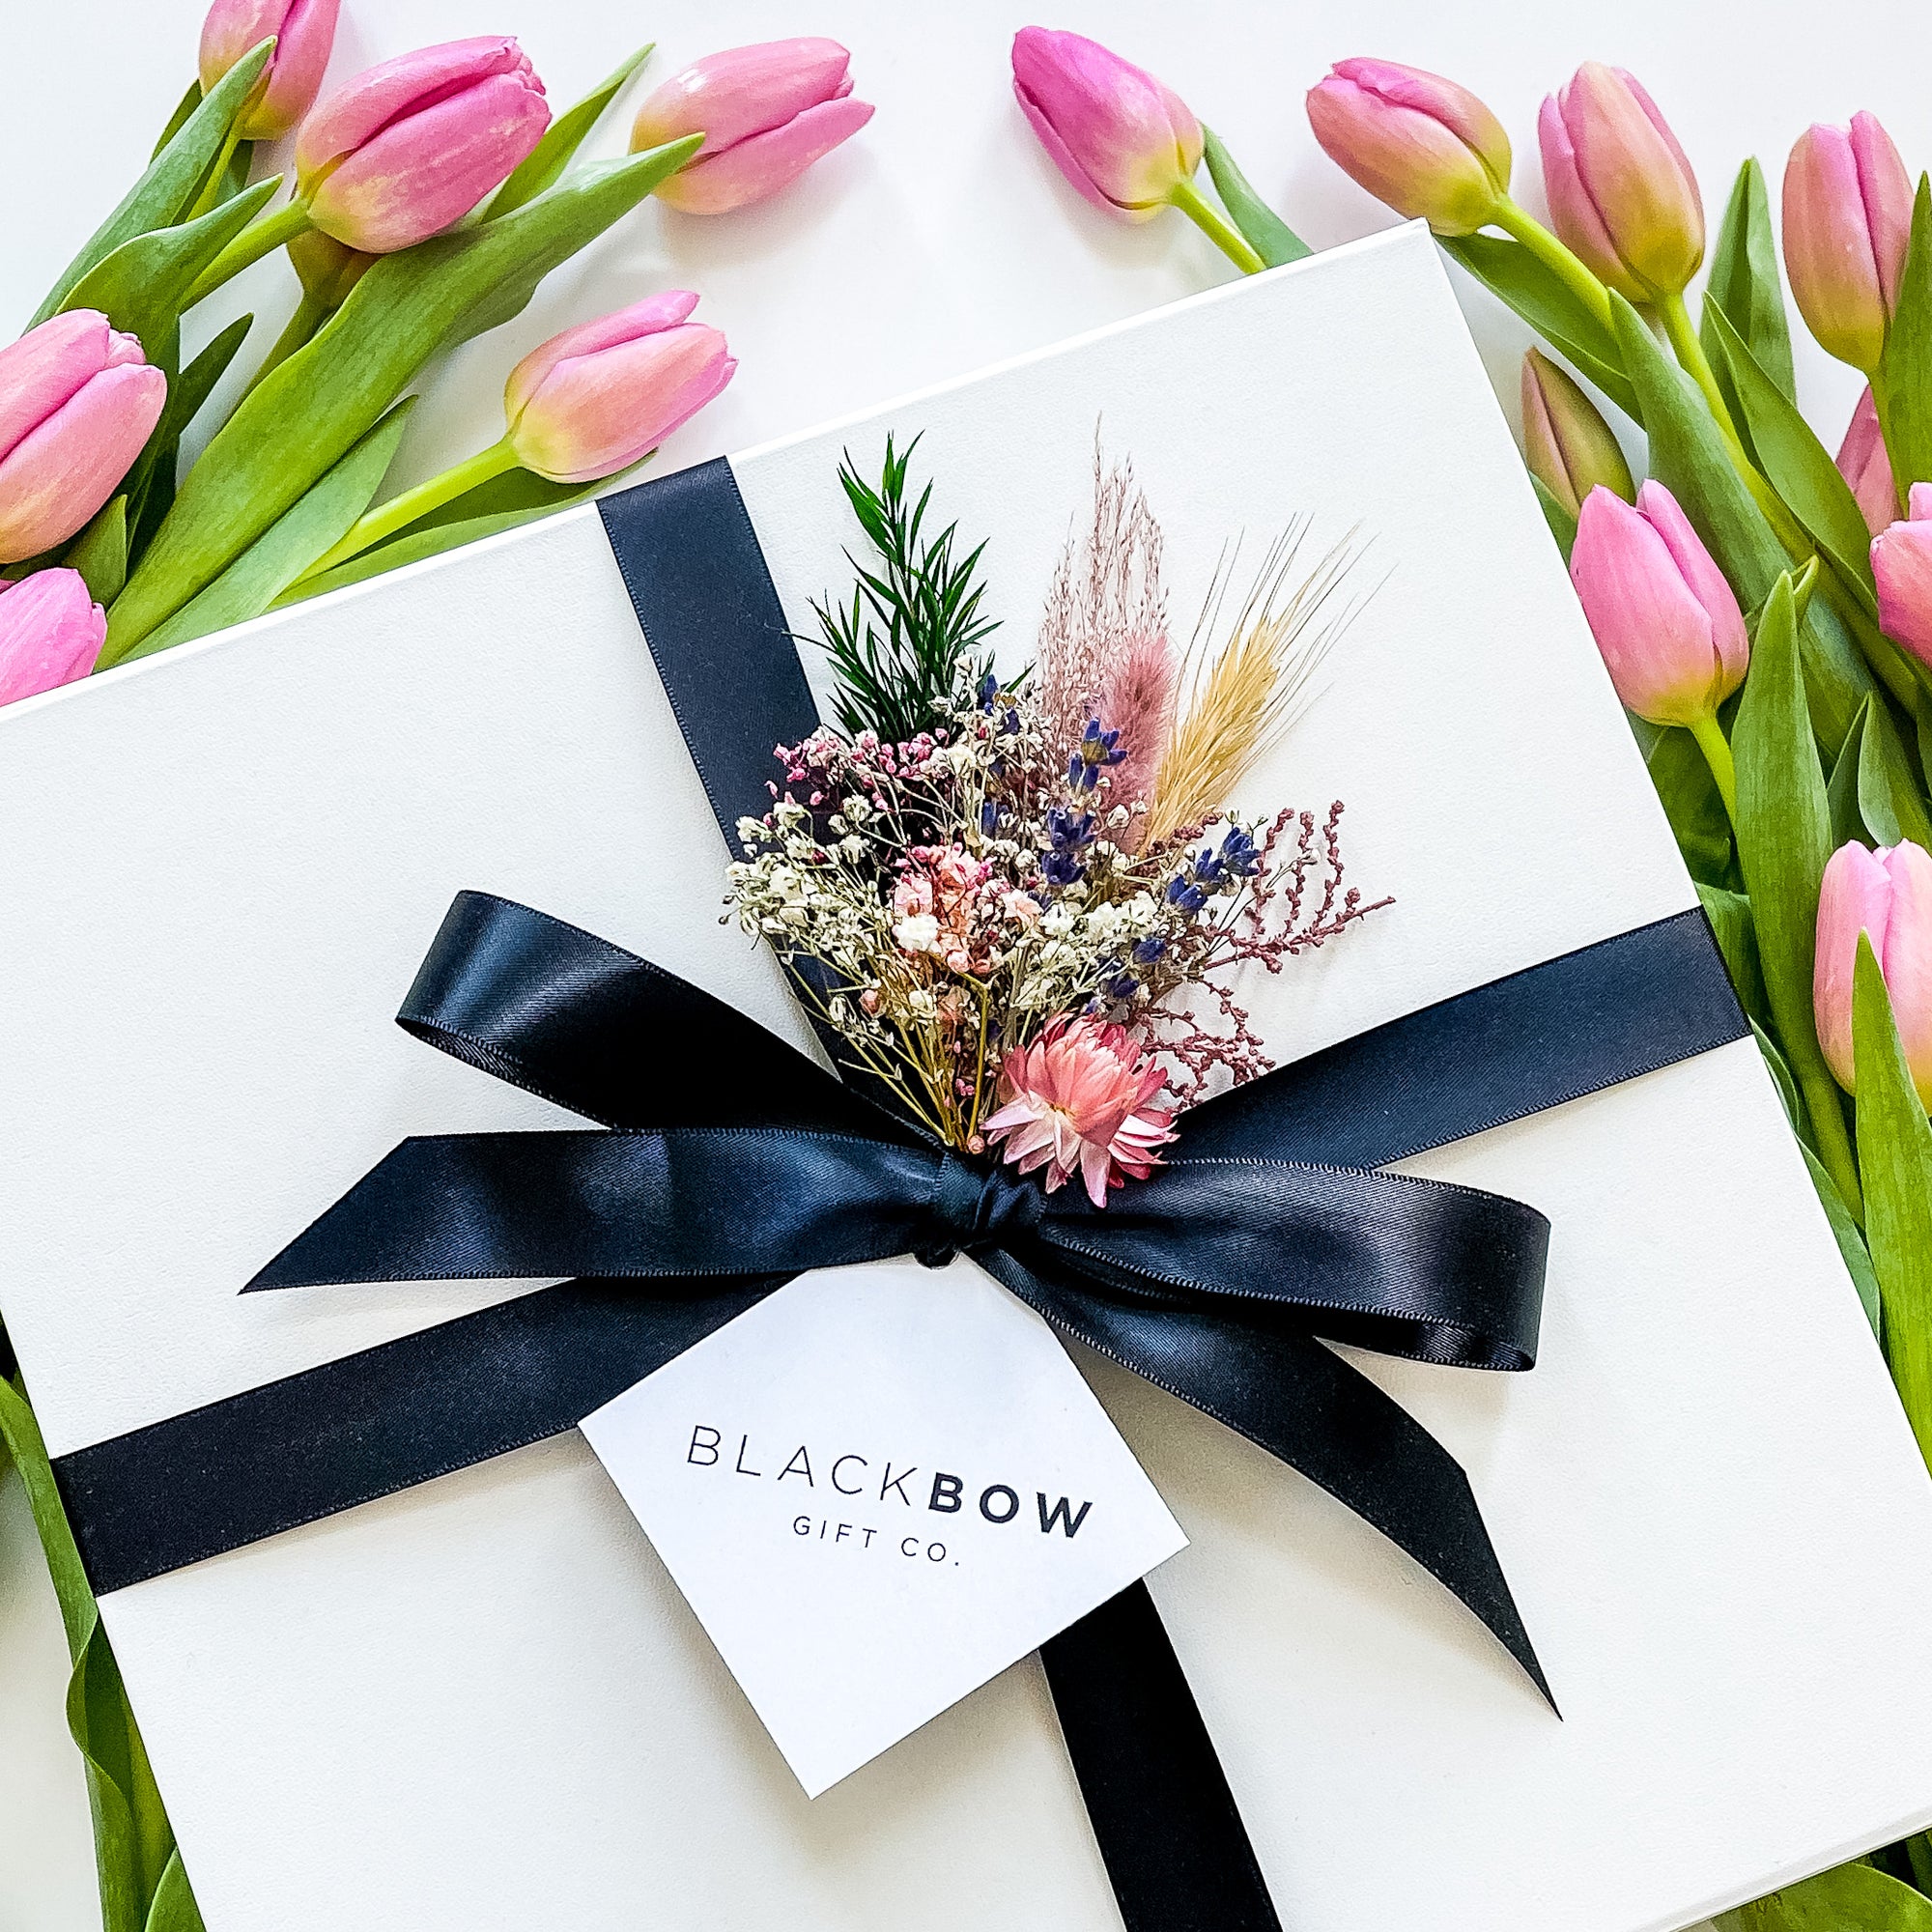 5 VIRTUAL MOTHER'S DAY GIFT IDEAS FOR 2021